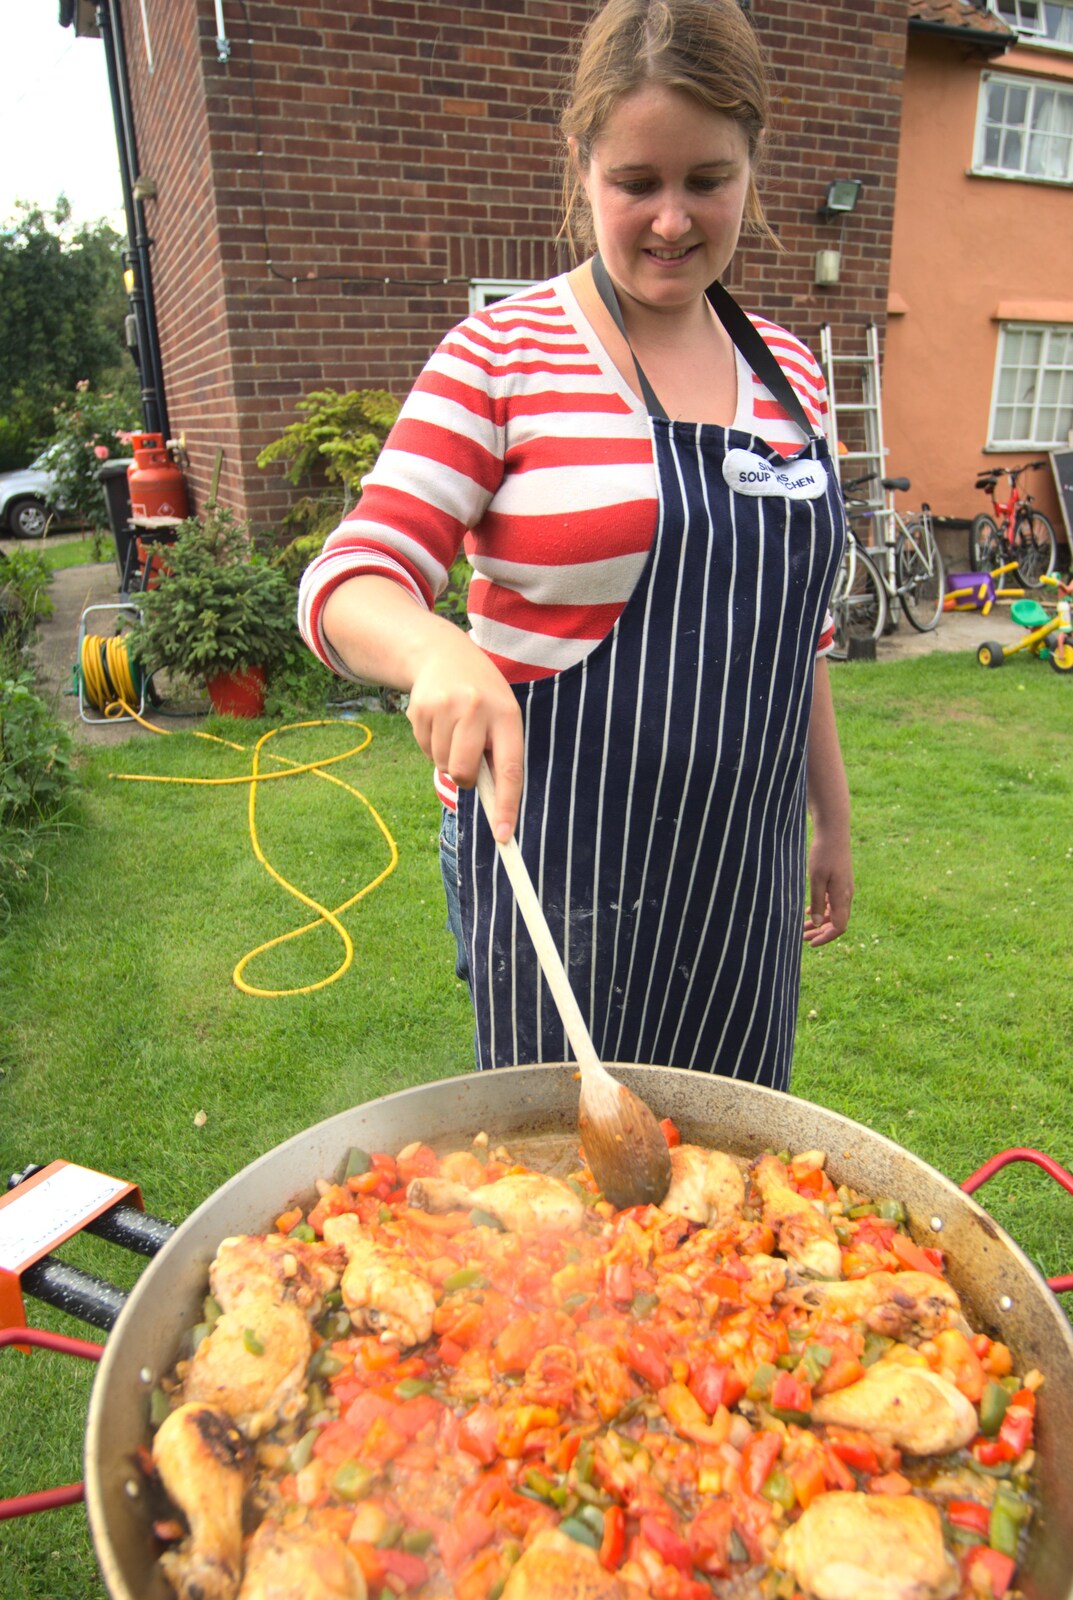 Isobel stirs it up from Paella and Roadworks, Brome, Suffolk - 9th July 2011